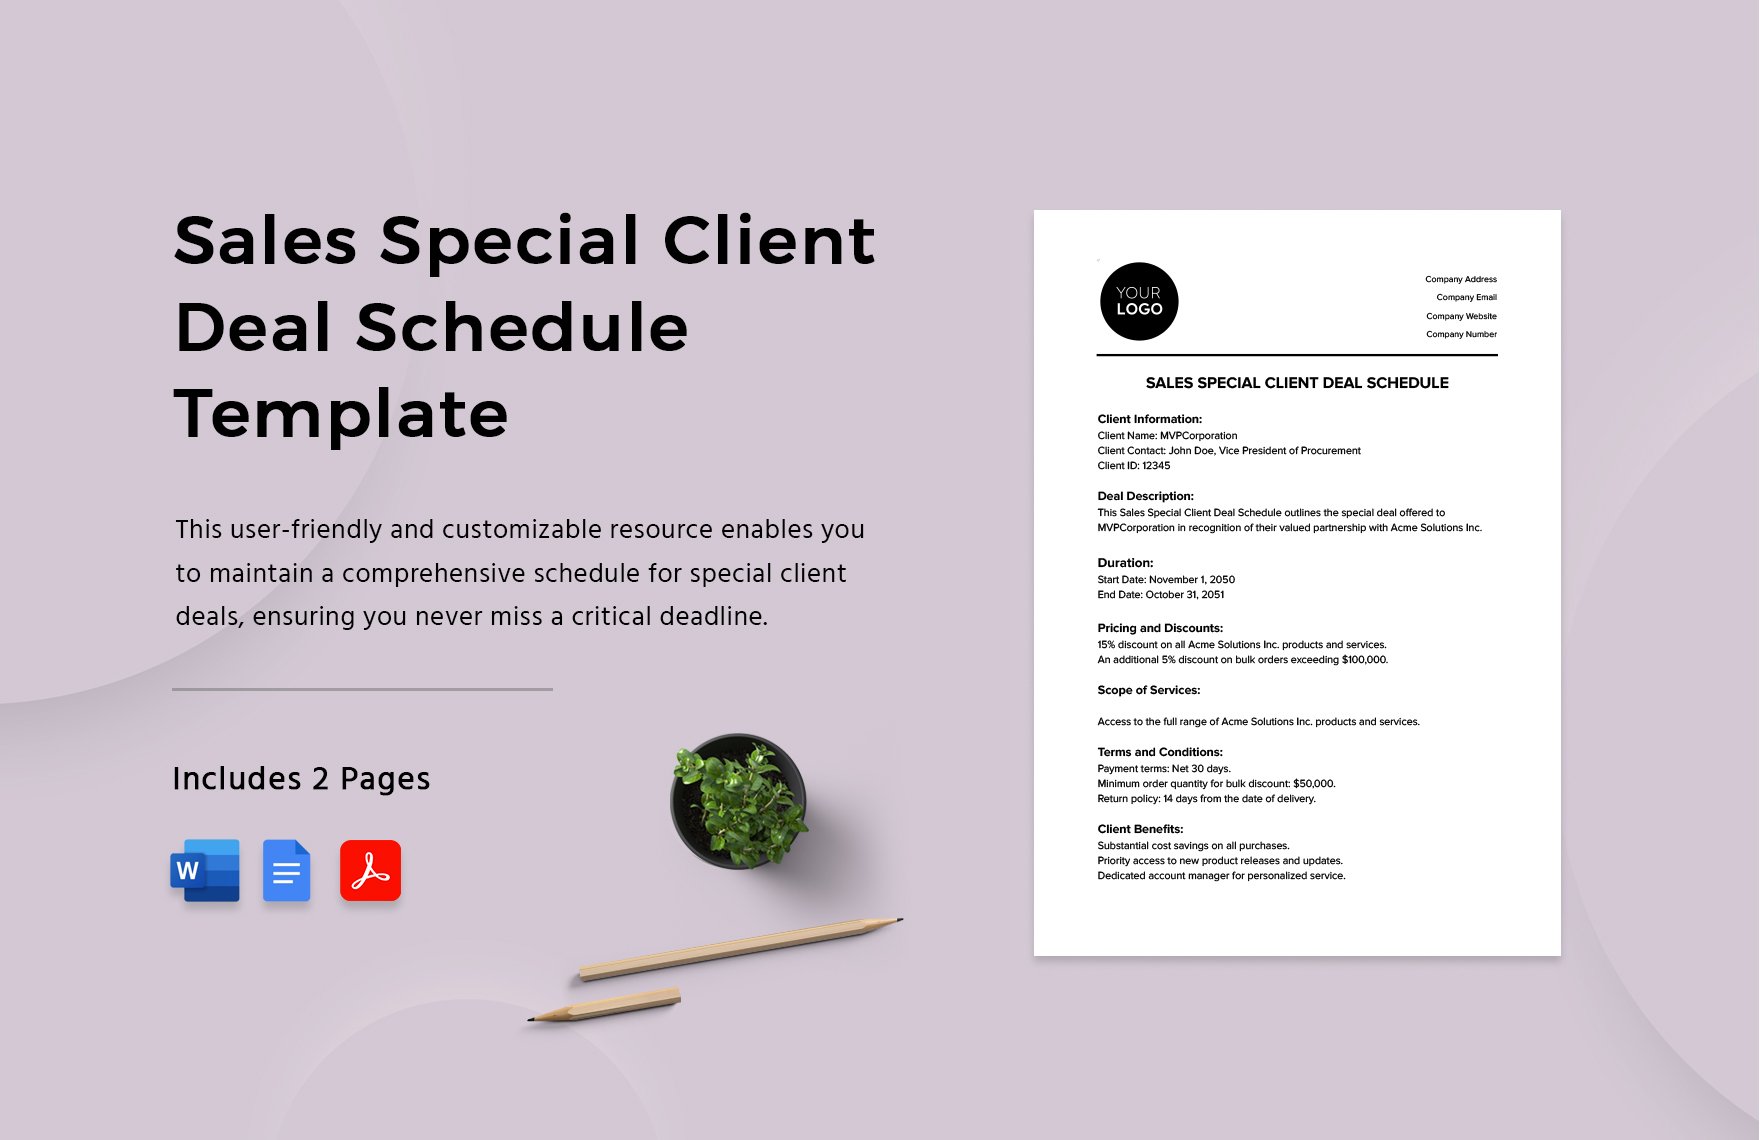 Sales Special Client Deal Schedule Template in Word, Google Docs, PDF